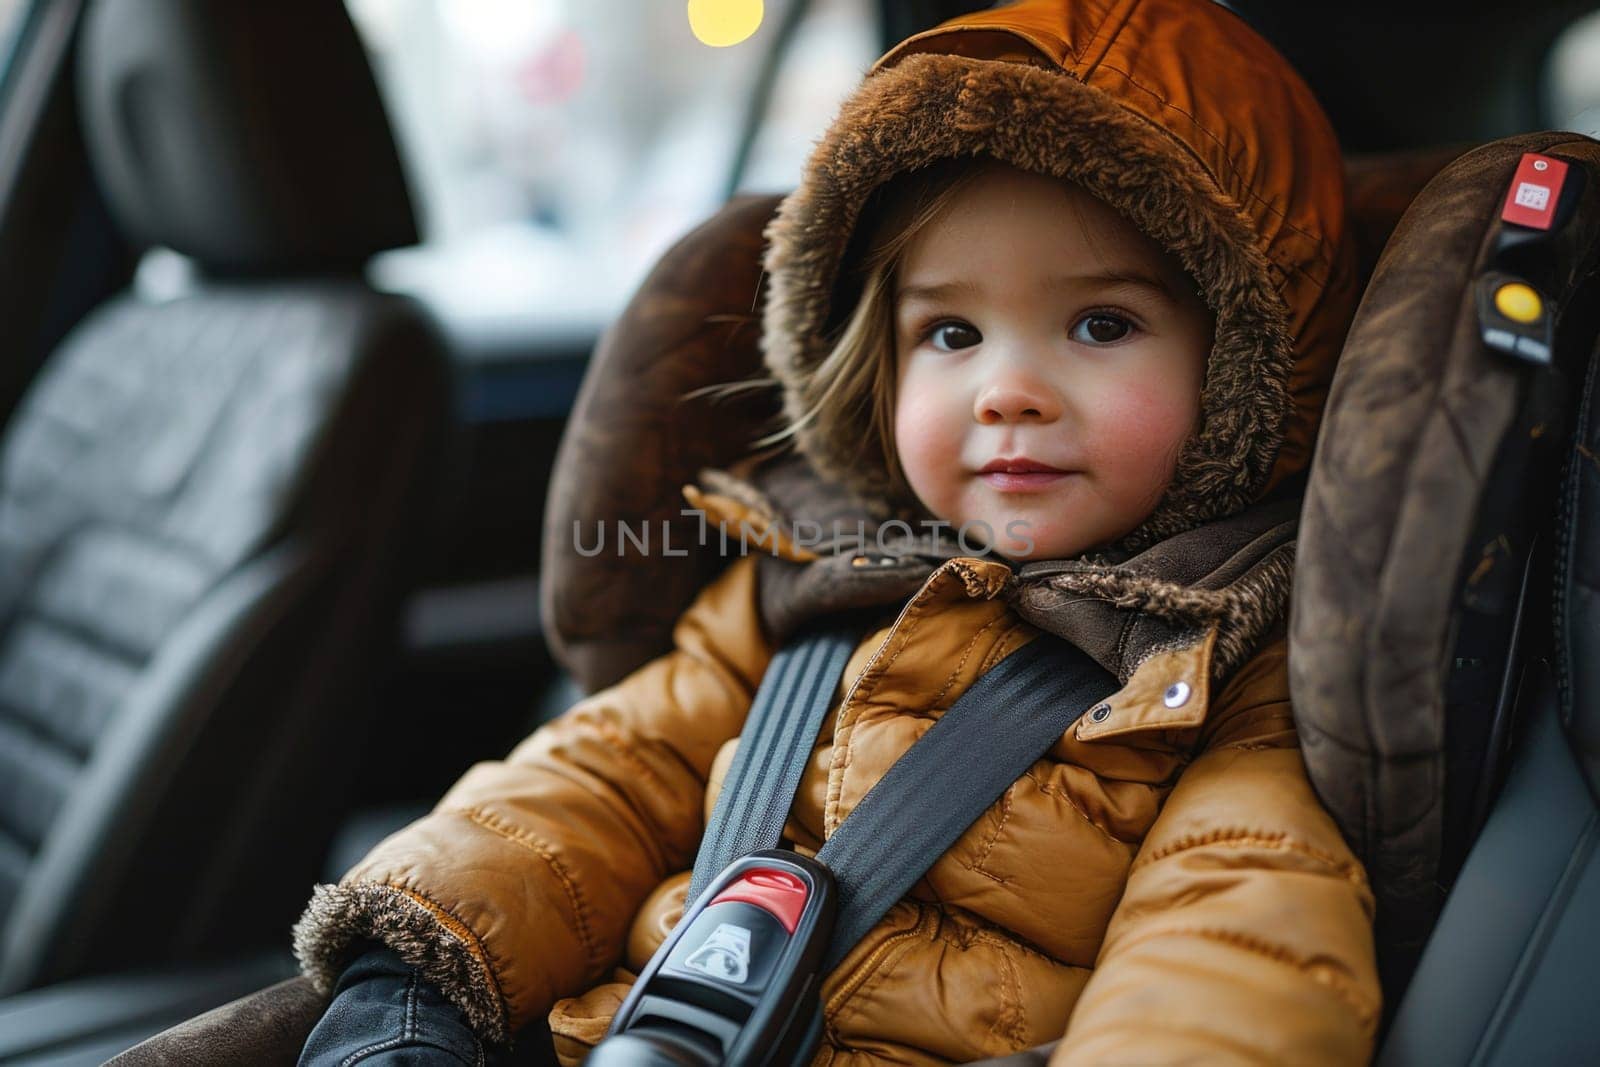 Child seat in the car: comfort and safety for the little passenger by Yurich32